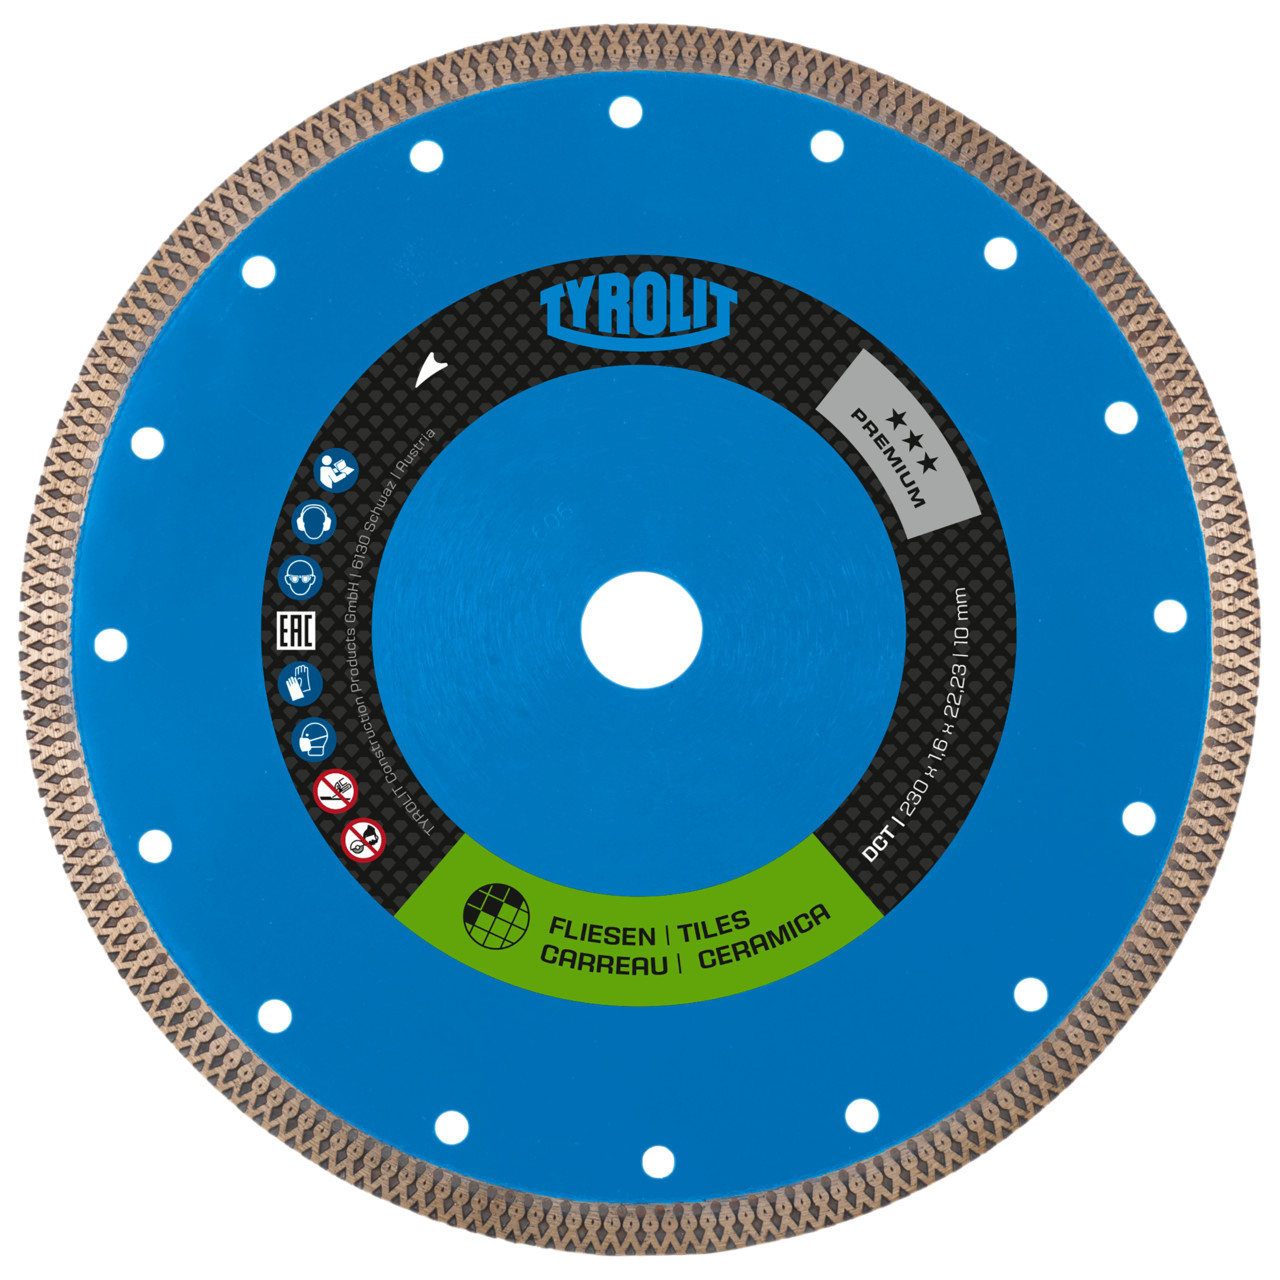 Tyrolit Dry-cutting saw blades DxDxH 105x1.2x20 DCT, shape: 1A1R (cutting disc with continuous cutting wheel), Art. 639558